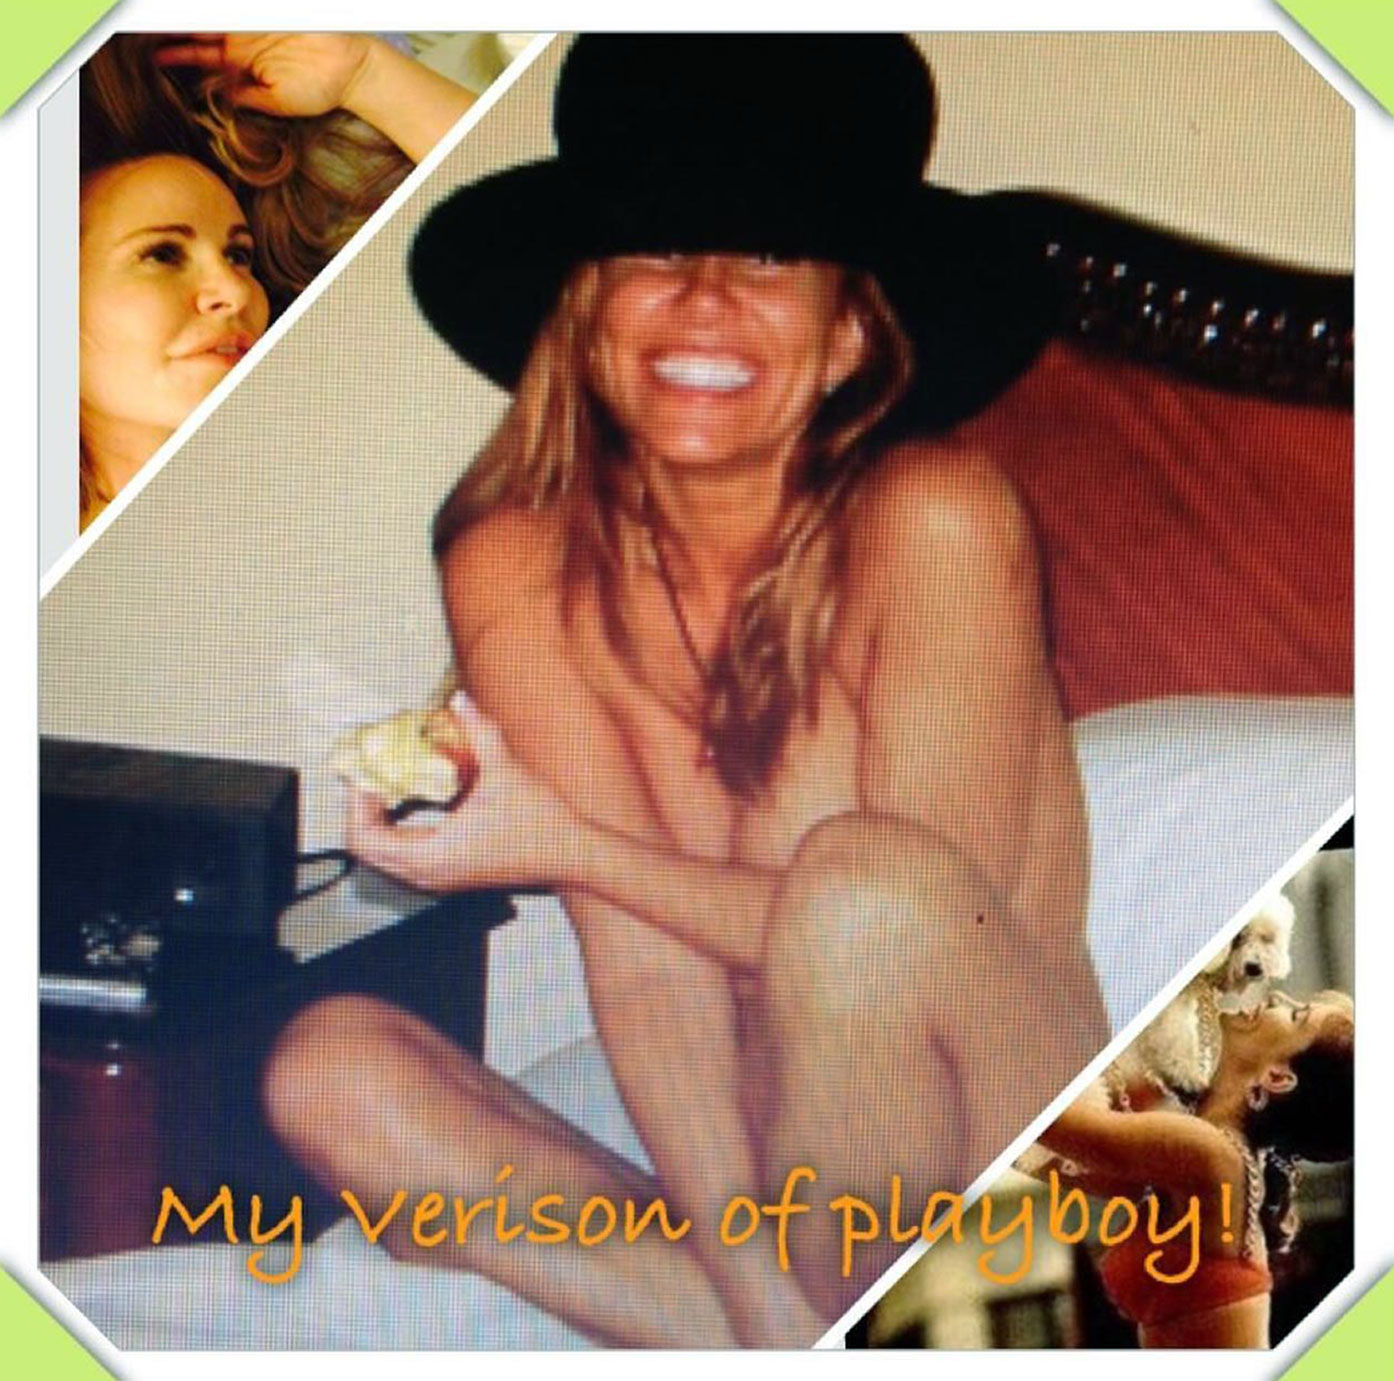 Tawny Kitaen hot naked topless sexy nude14